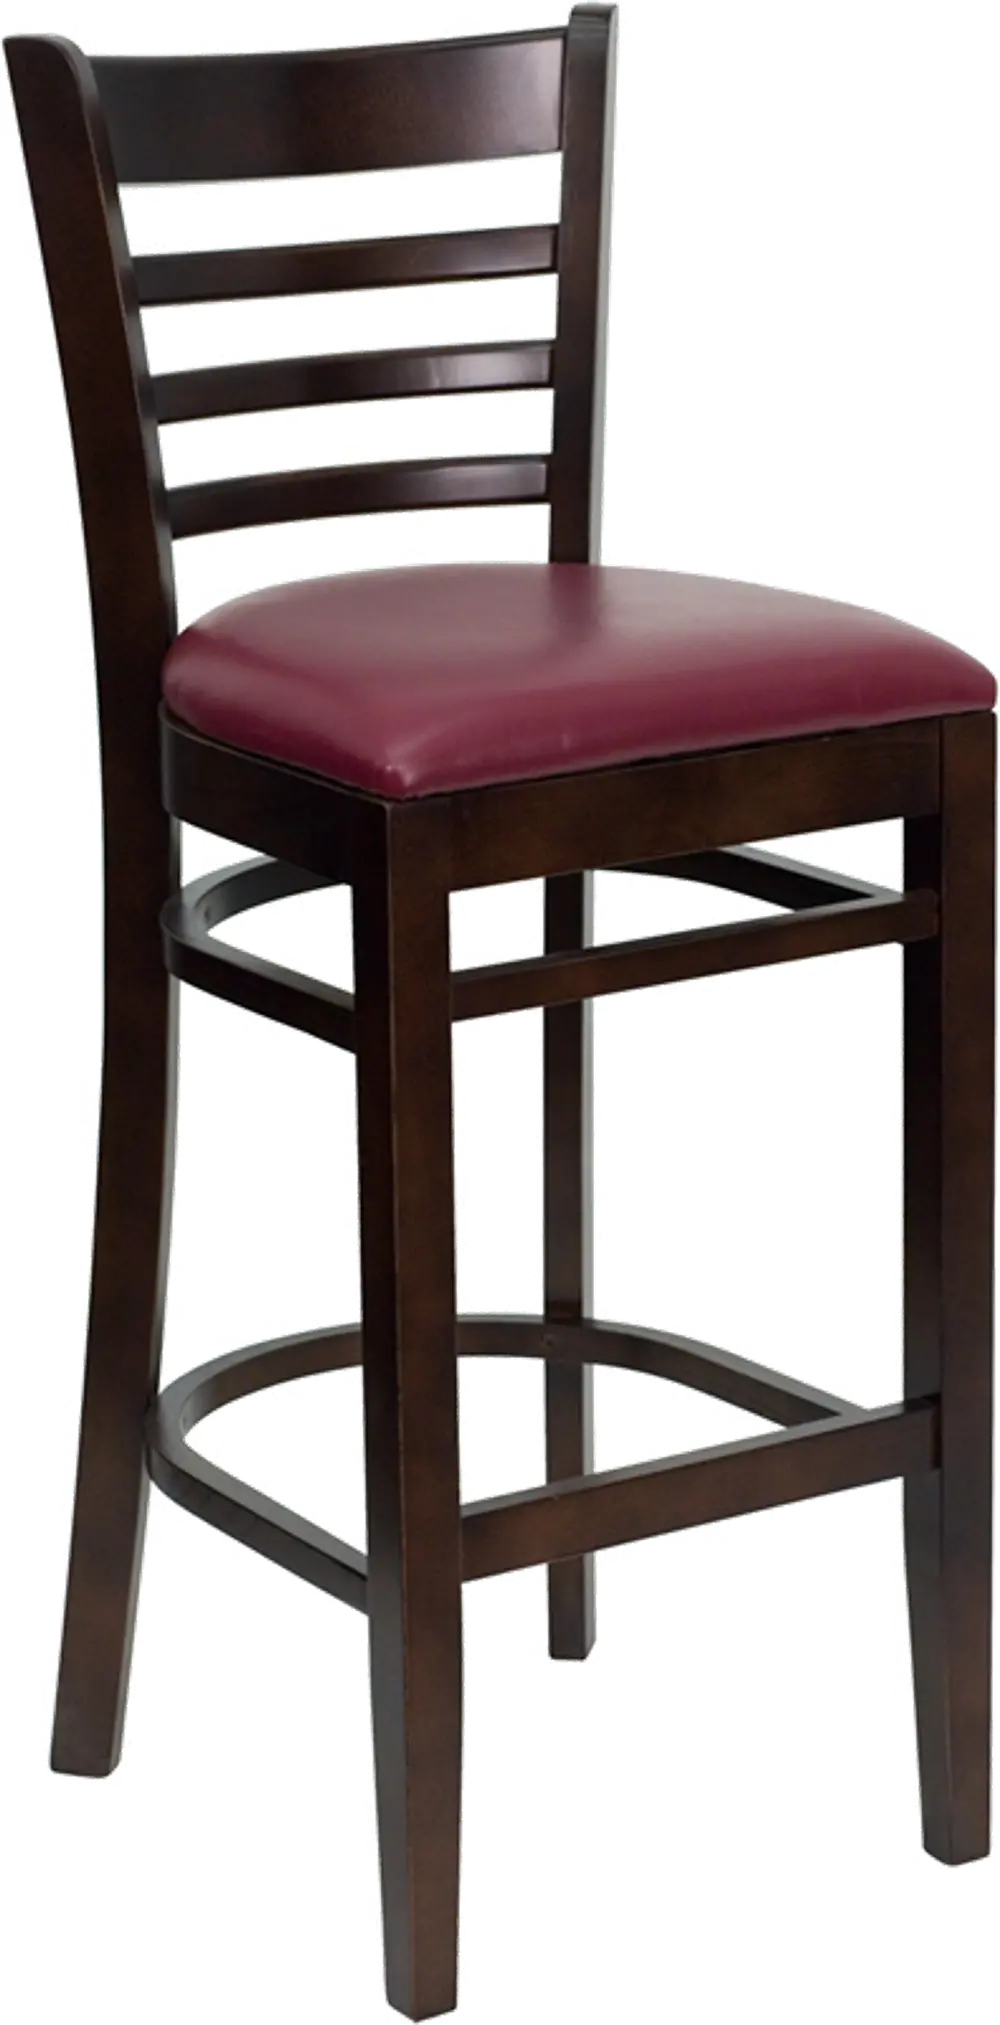 Brown and Burgundy Upholstered Commercial Bar Stool - Ladderback-1